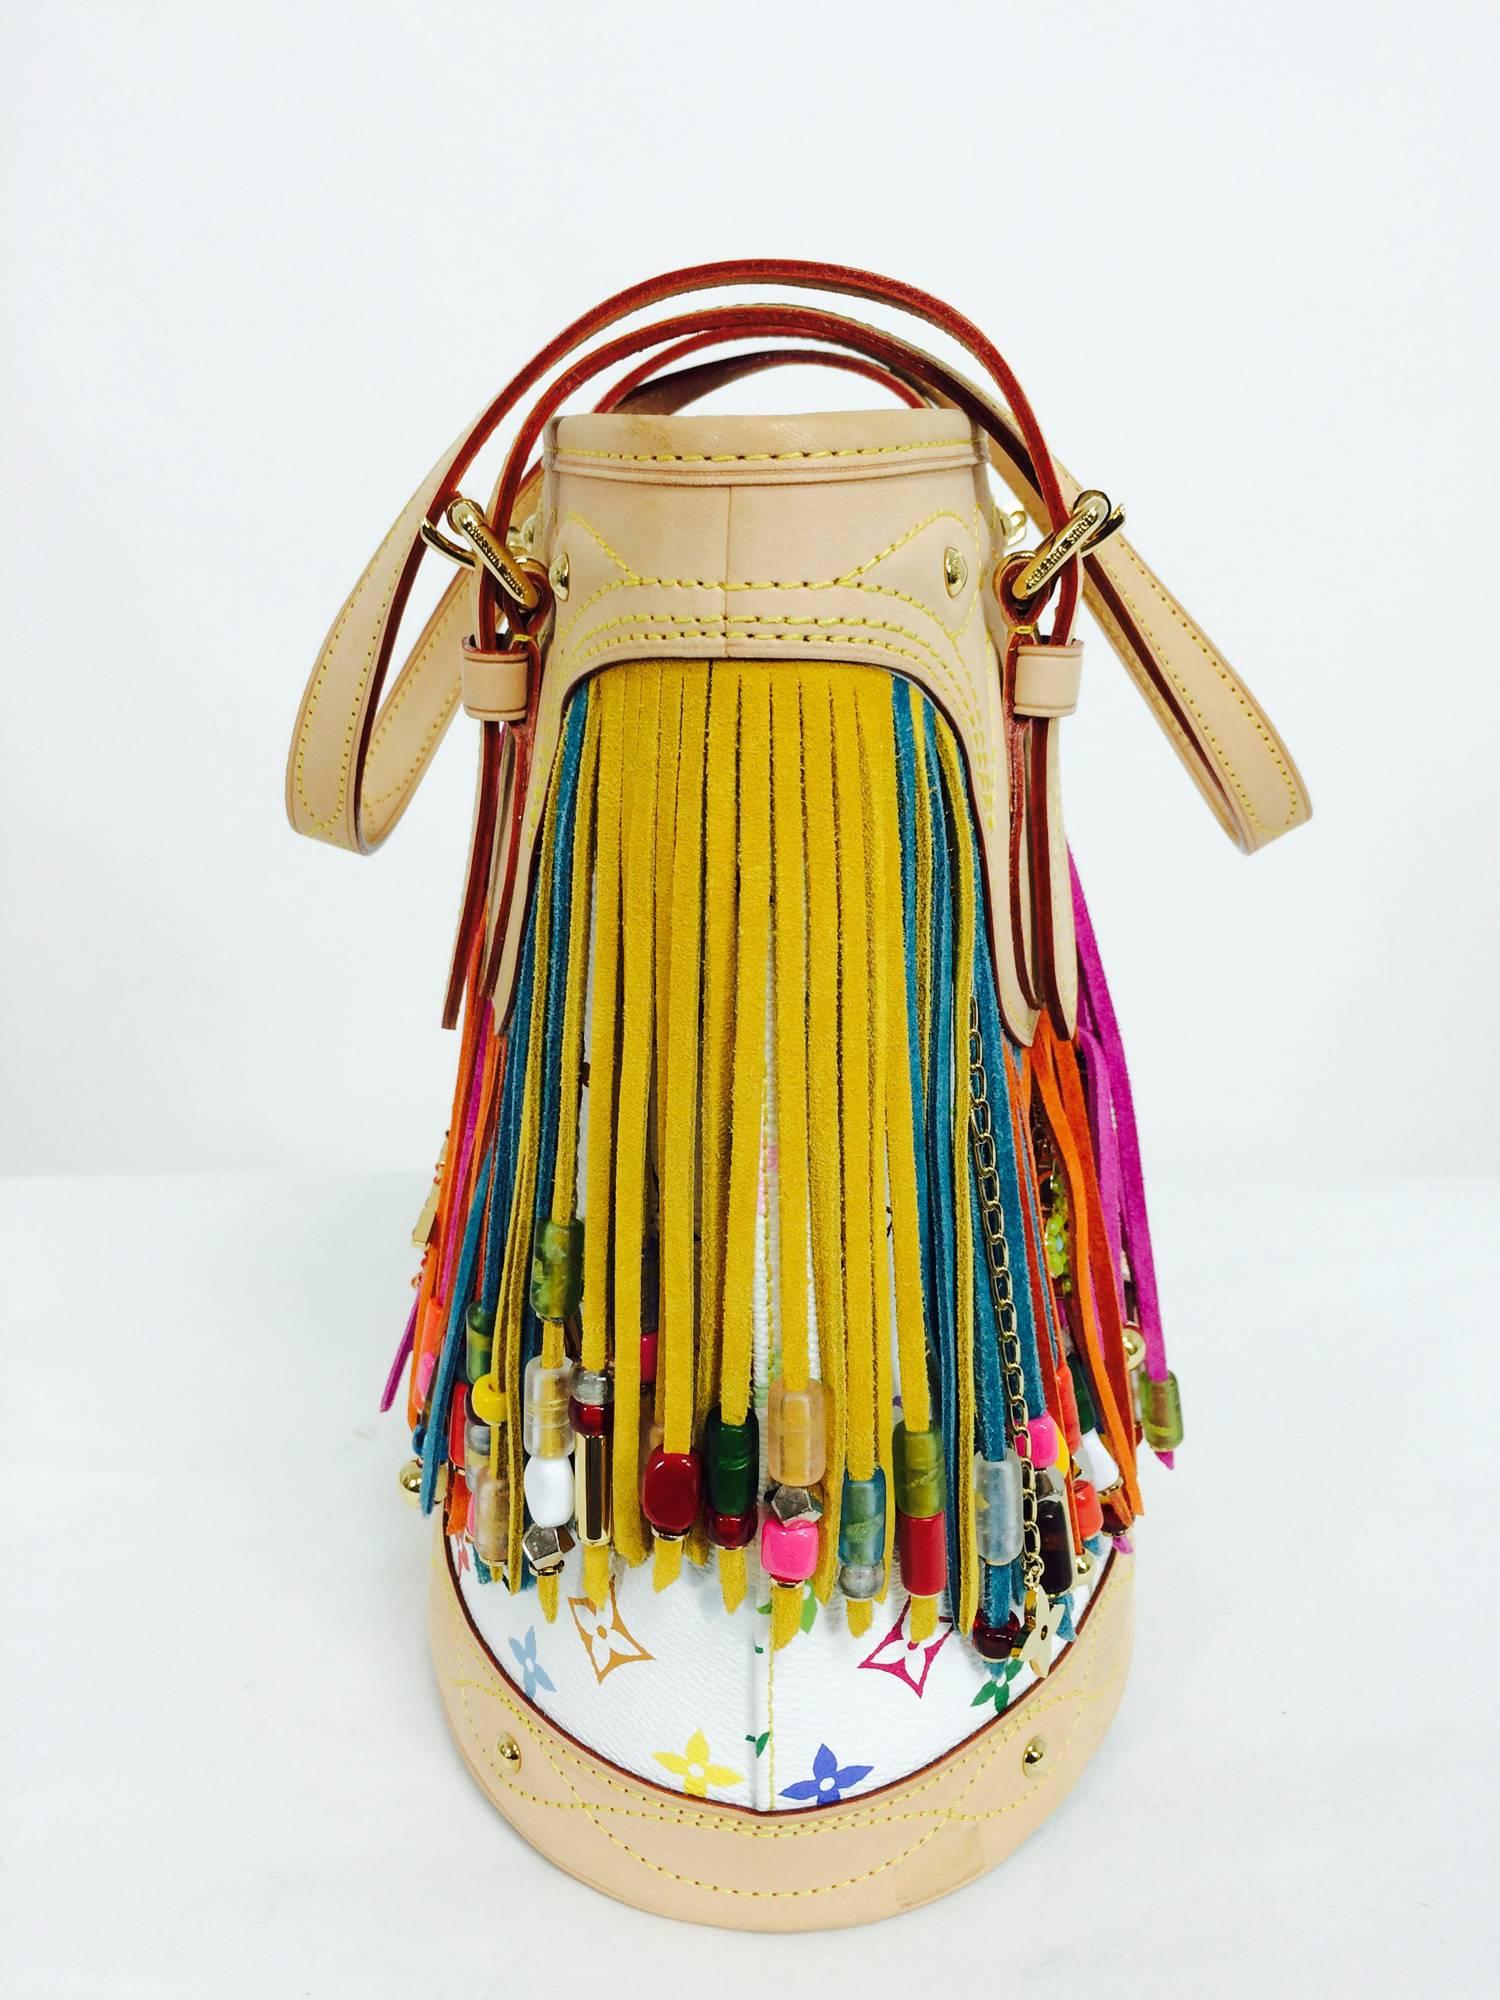 Louis Vuitton Multicolore Fringe Bucket Bag designed by Takashi Murakami 2006 in white monogram canvas with brightly coloured suede fringe & jeweled LV logo charms...Natural Vachetta leather trim and handles...Gold hardware and adjustable buckles at